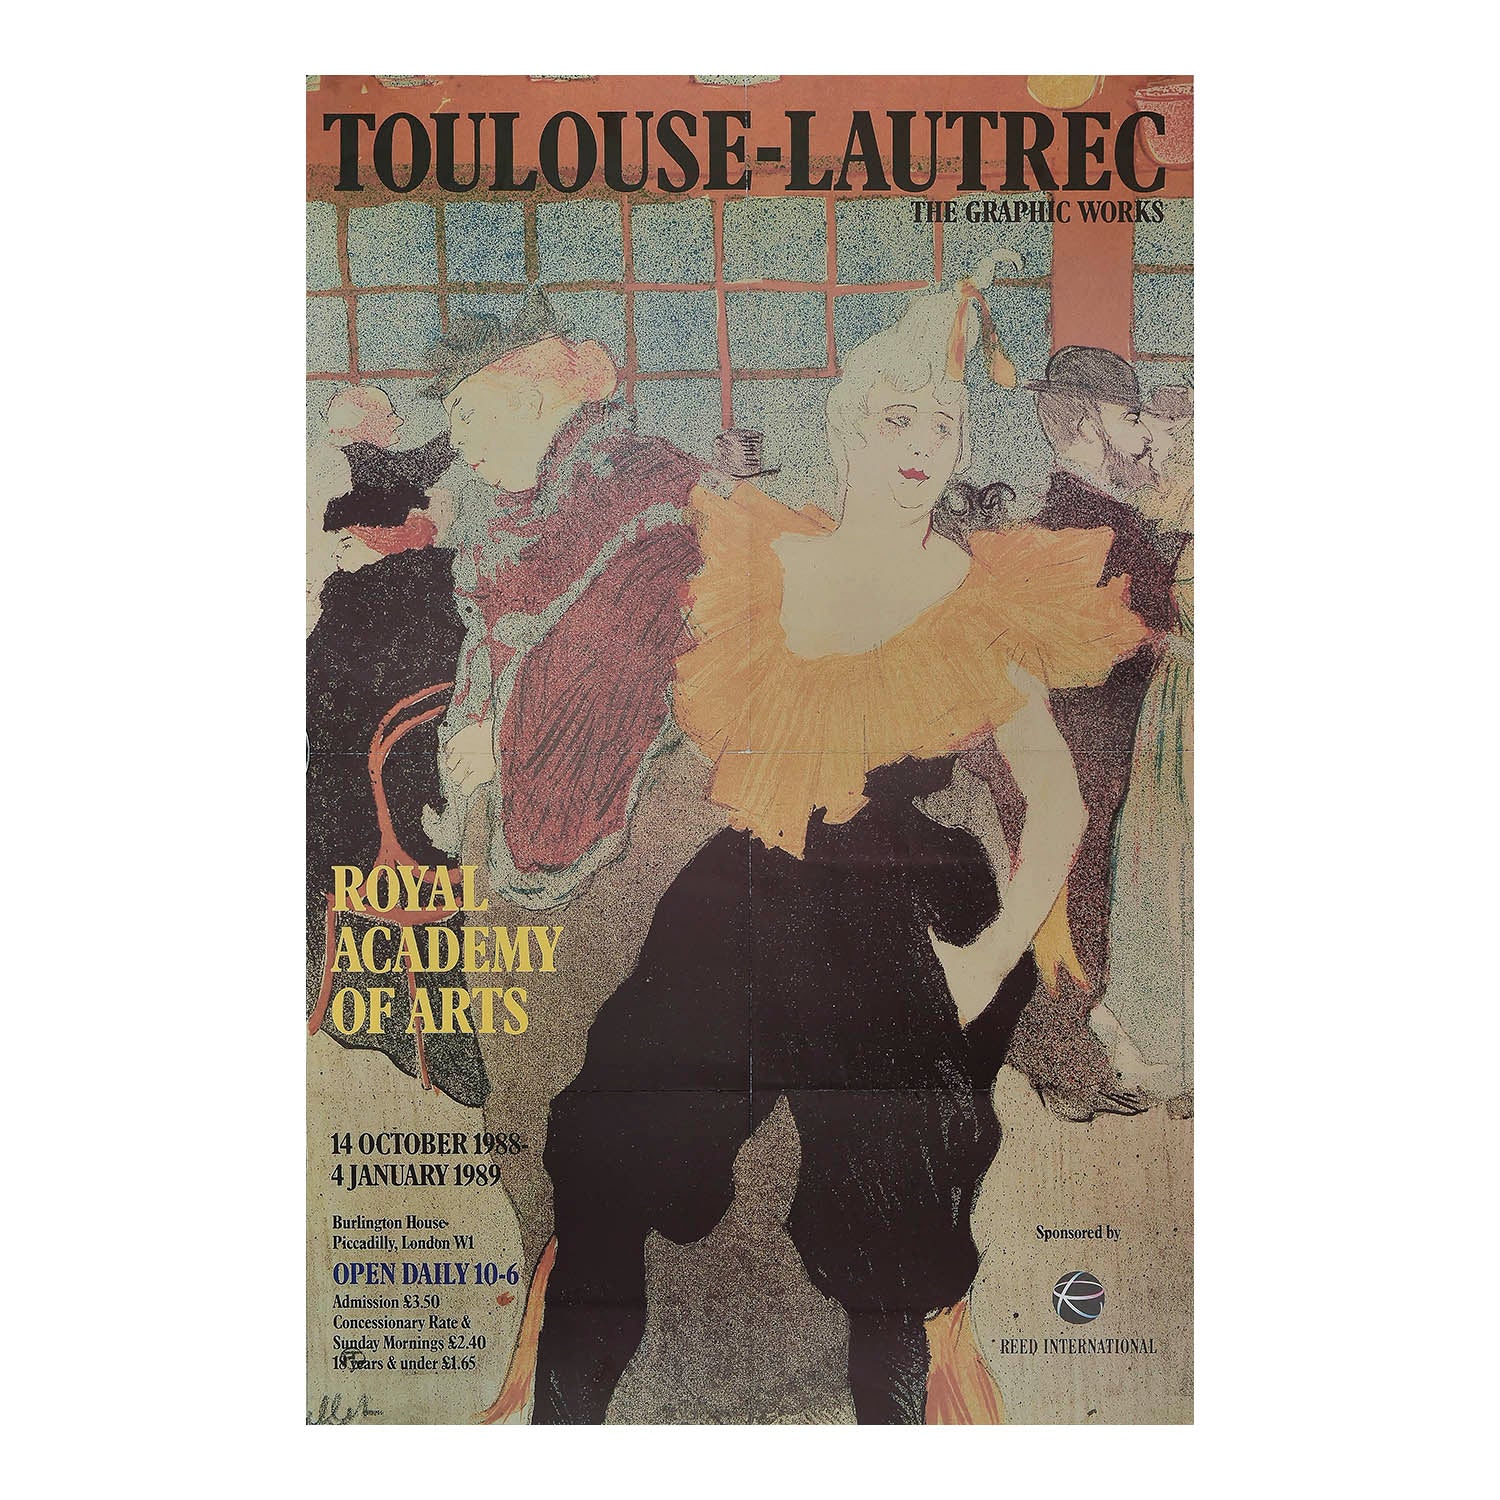 Original art exhibition poster, Toulouse Lautrec. The Graphic Works, designed by Philip Miles for the Royal Academy of Arts, 1988. The design features a detail of The Clown Cha-U-Kao at the Moulin Rouge (1897) by Henri de Toulouse-Lautrec.